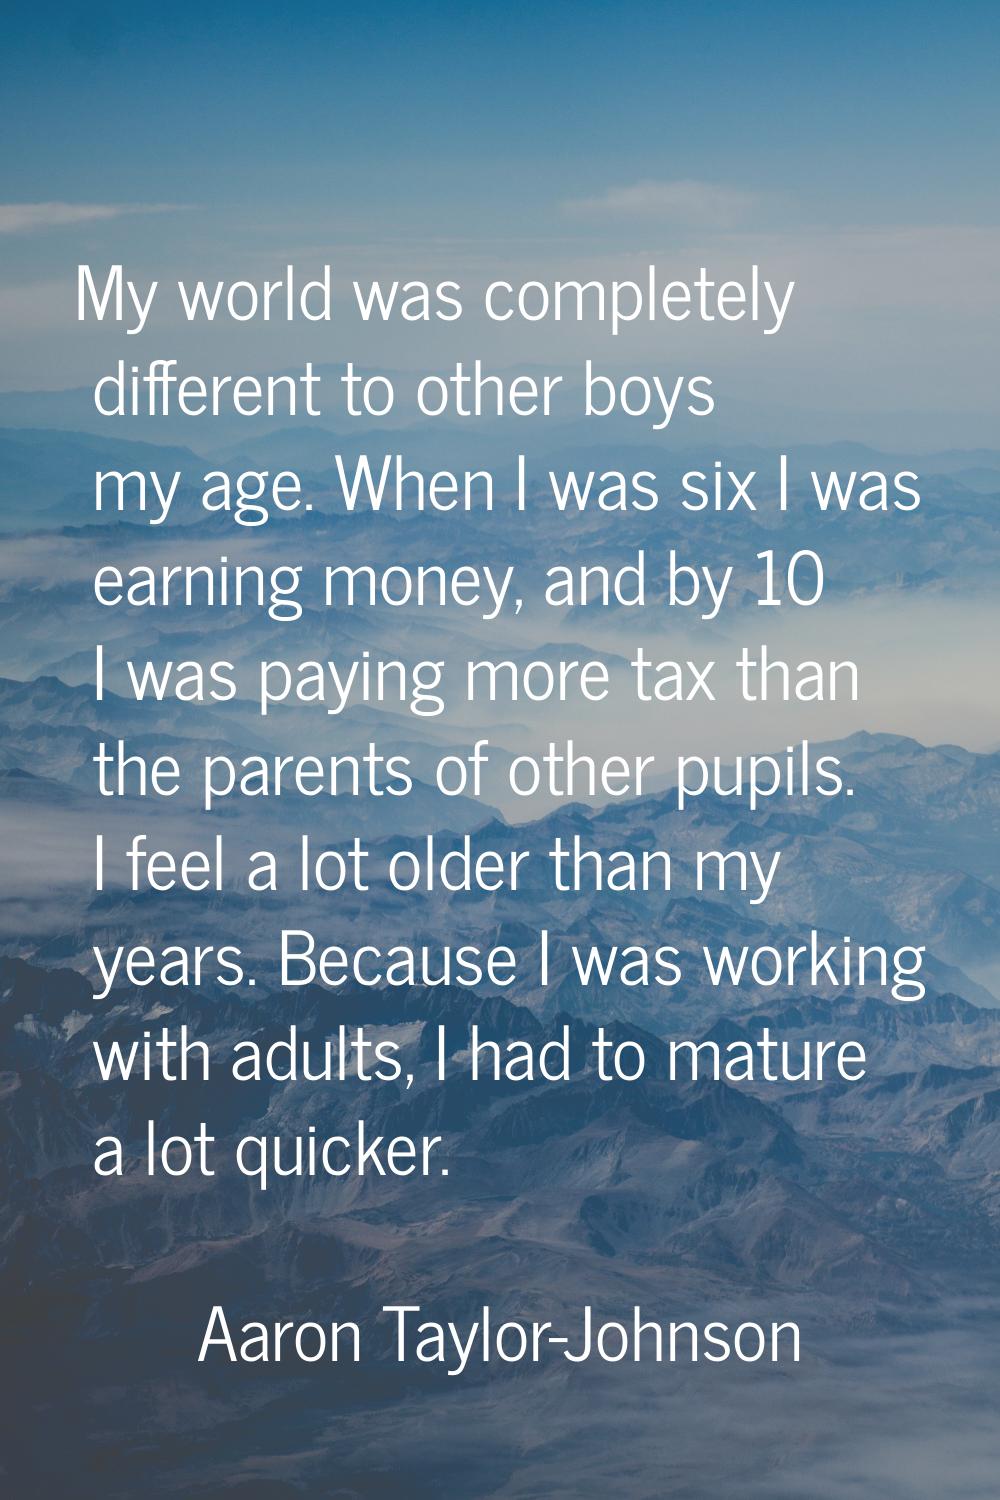 My world was completely different to other boys my age. When I was six I was earning money, and by 